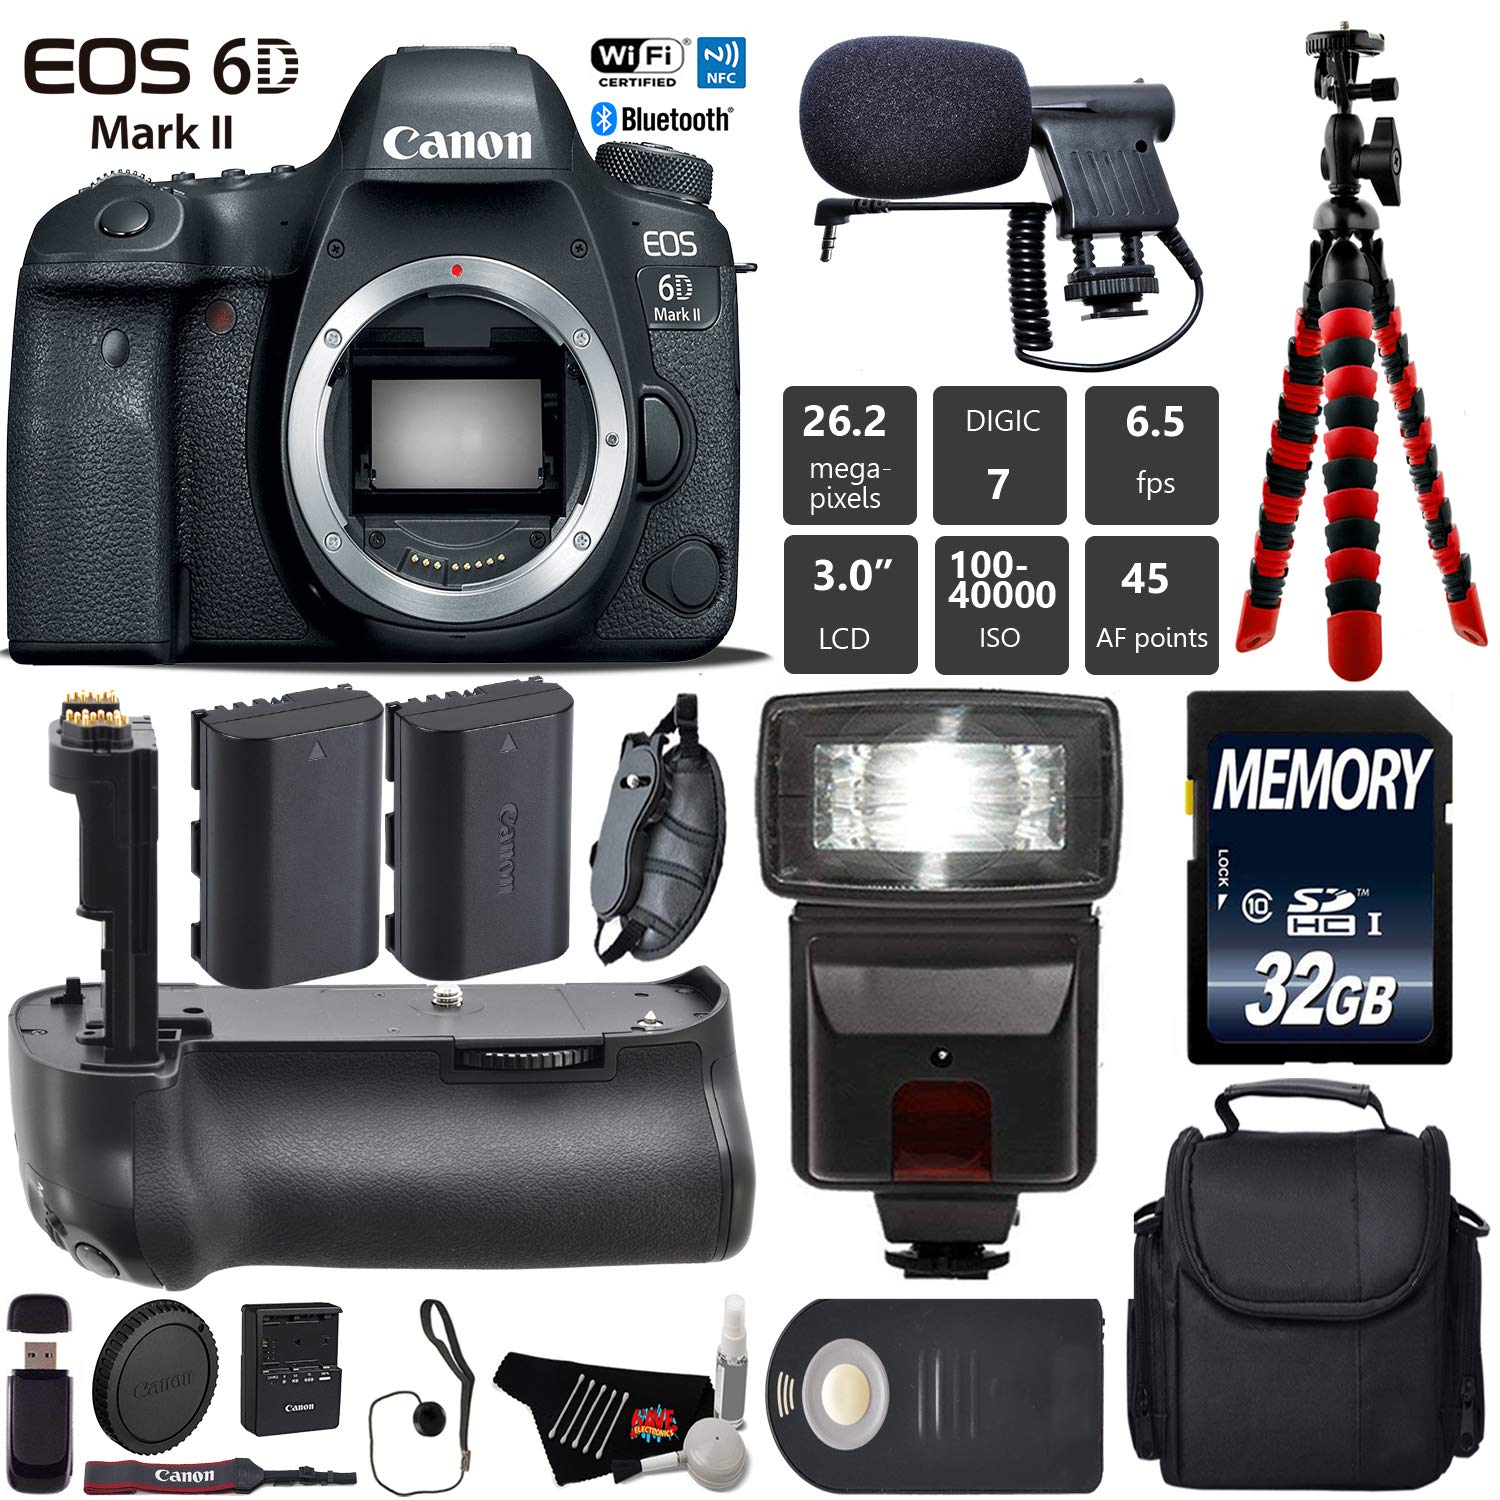 Canon EOS 6D Mark II DSLR Camera (Body Only) + Professional Battery Grip + Condenser Microphone + Flash + Extra Battery Starter Bundle